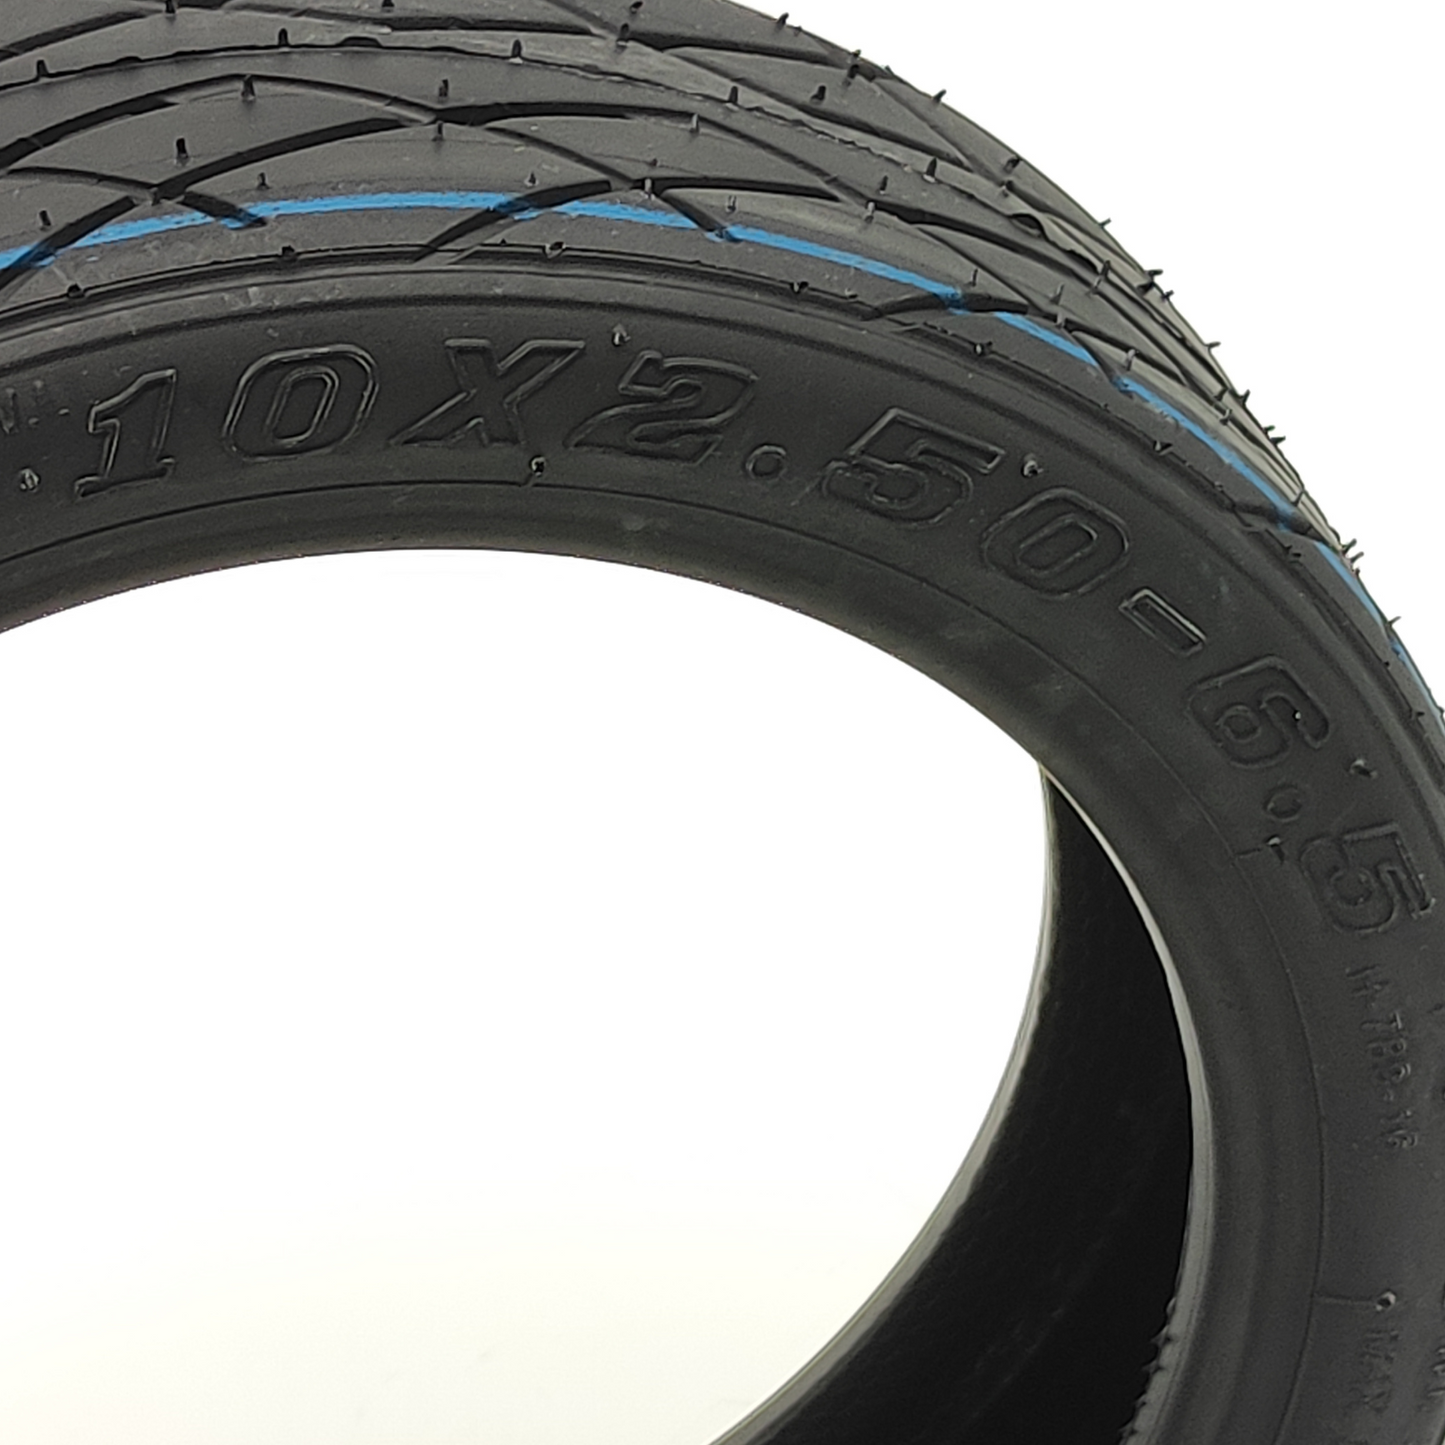 ODYS NEO e100 tubeless tires 10x2.5-6.5 with gel layer